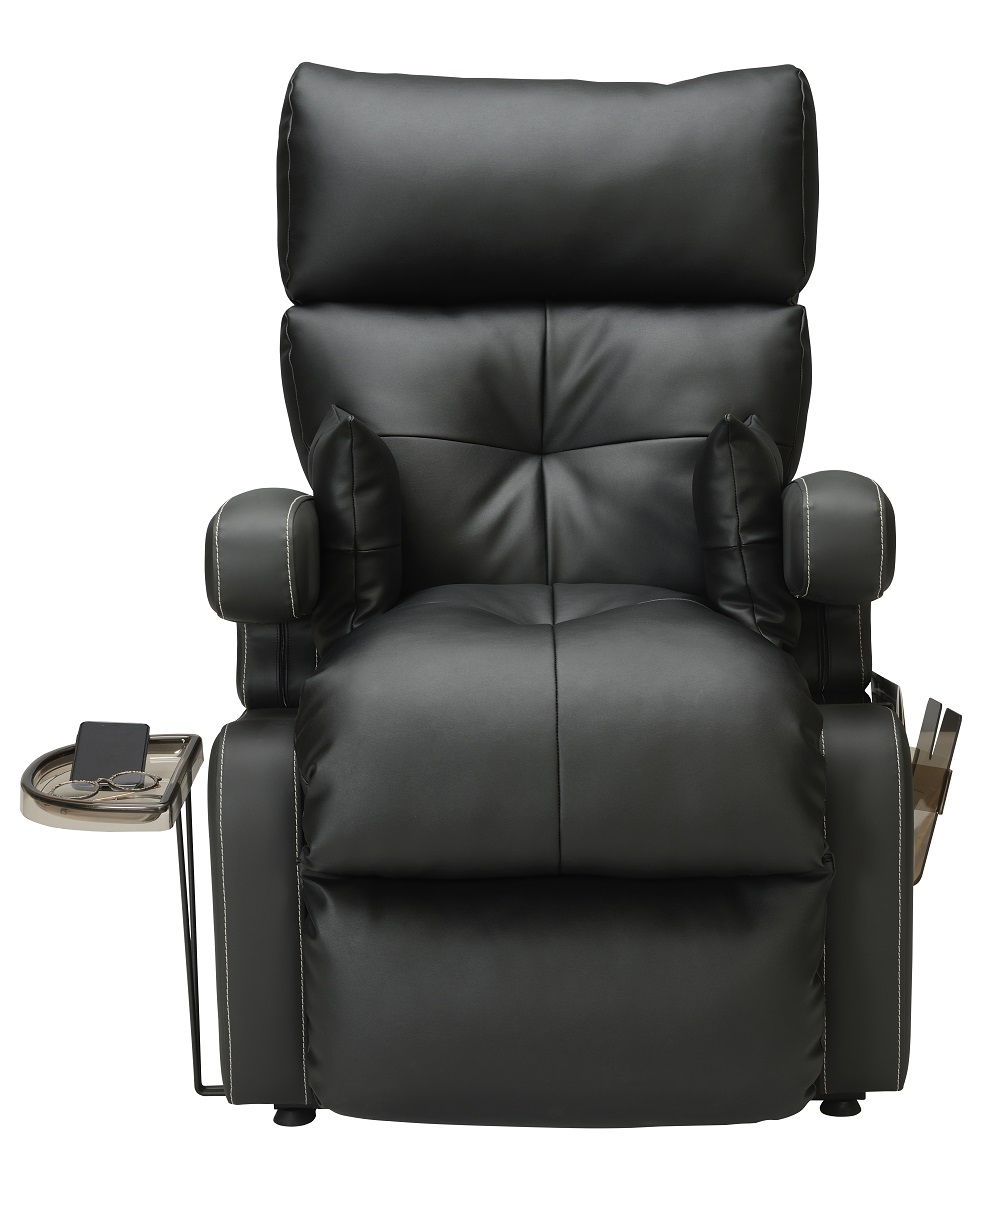 Cocoon Lift Recliner Chair - Dual Power - Generation 2